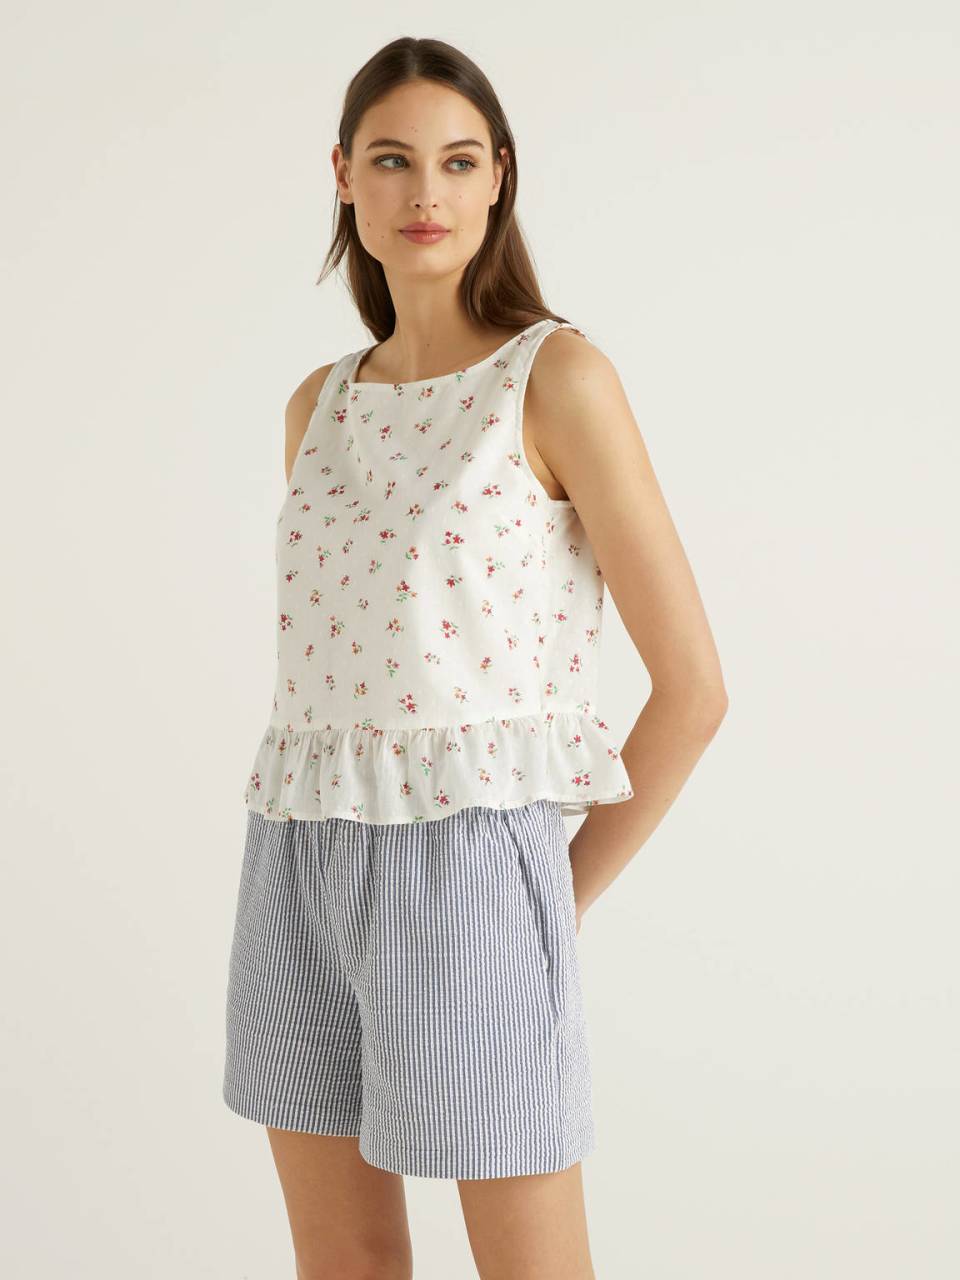 Benetton Top in pure floral print cotton. 1